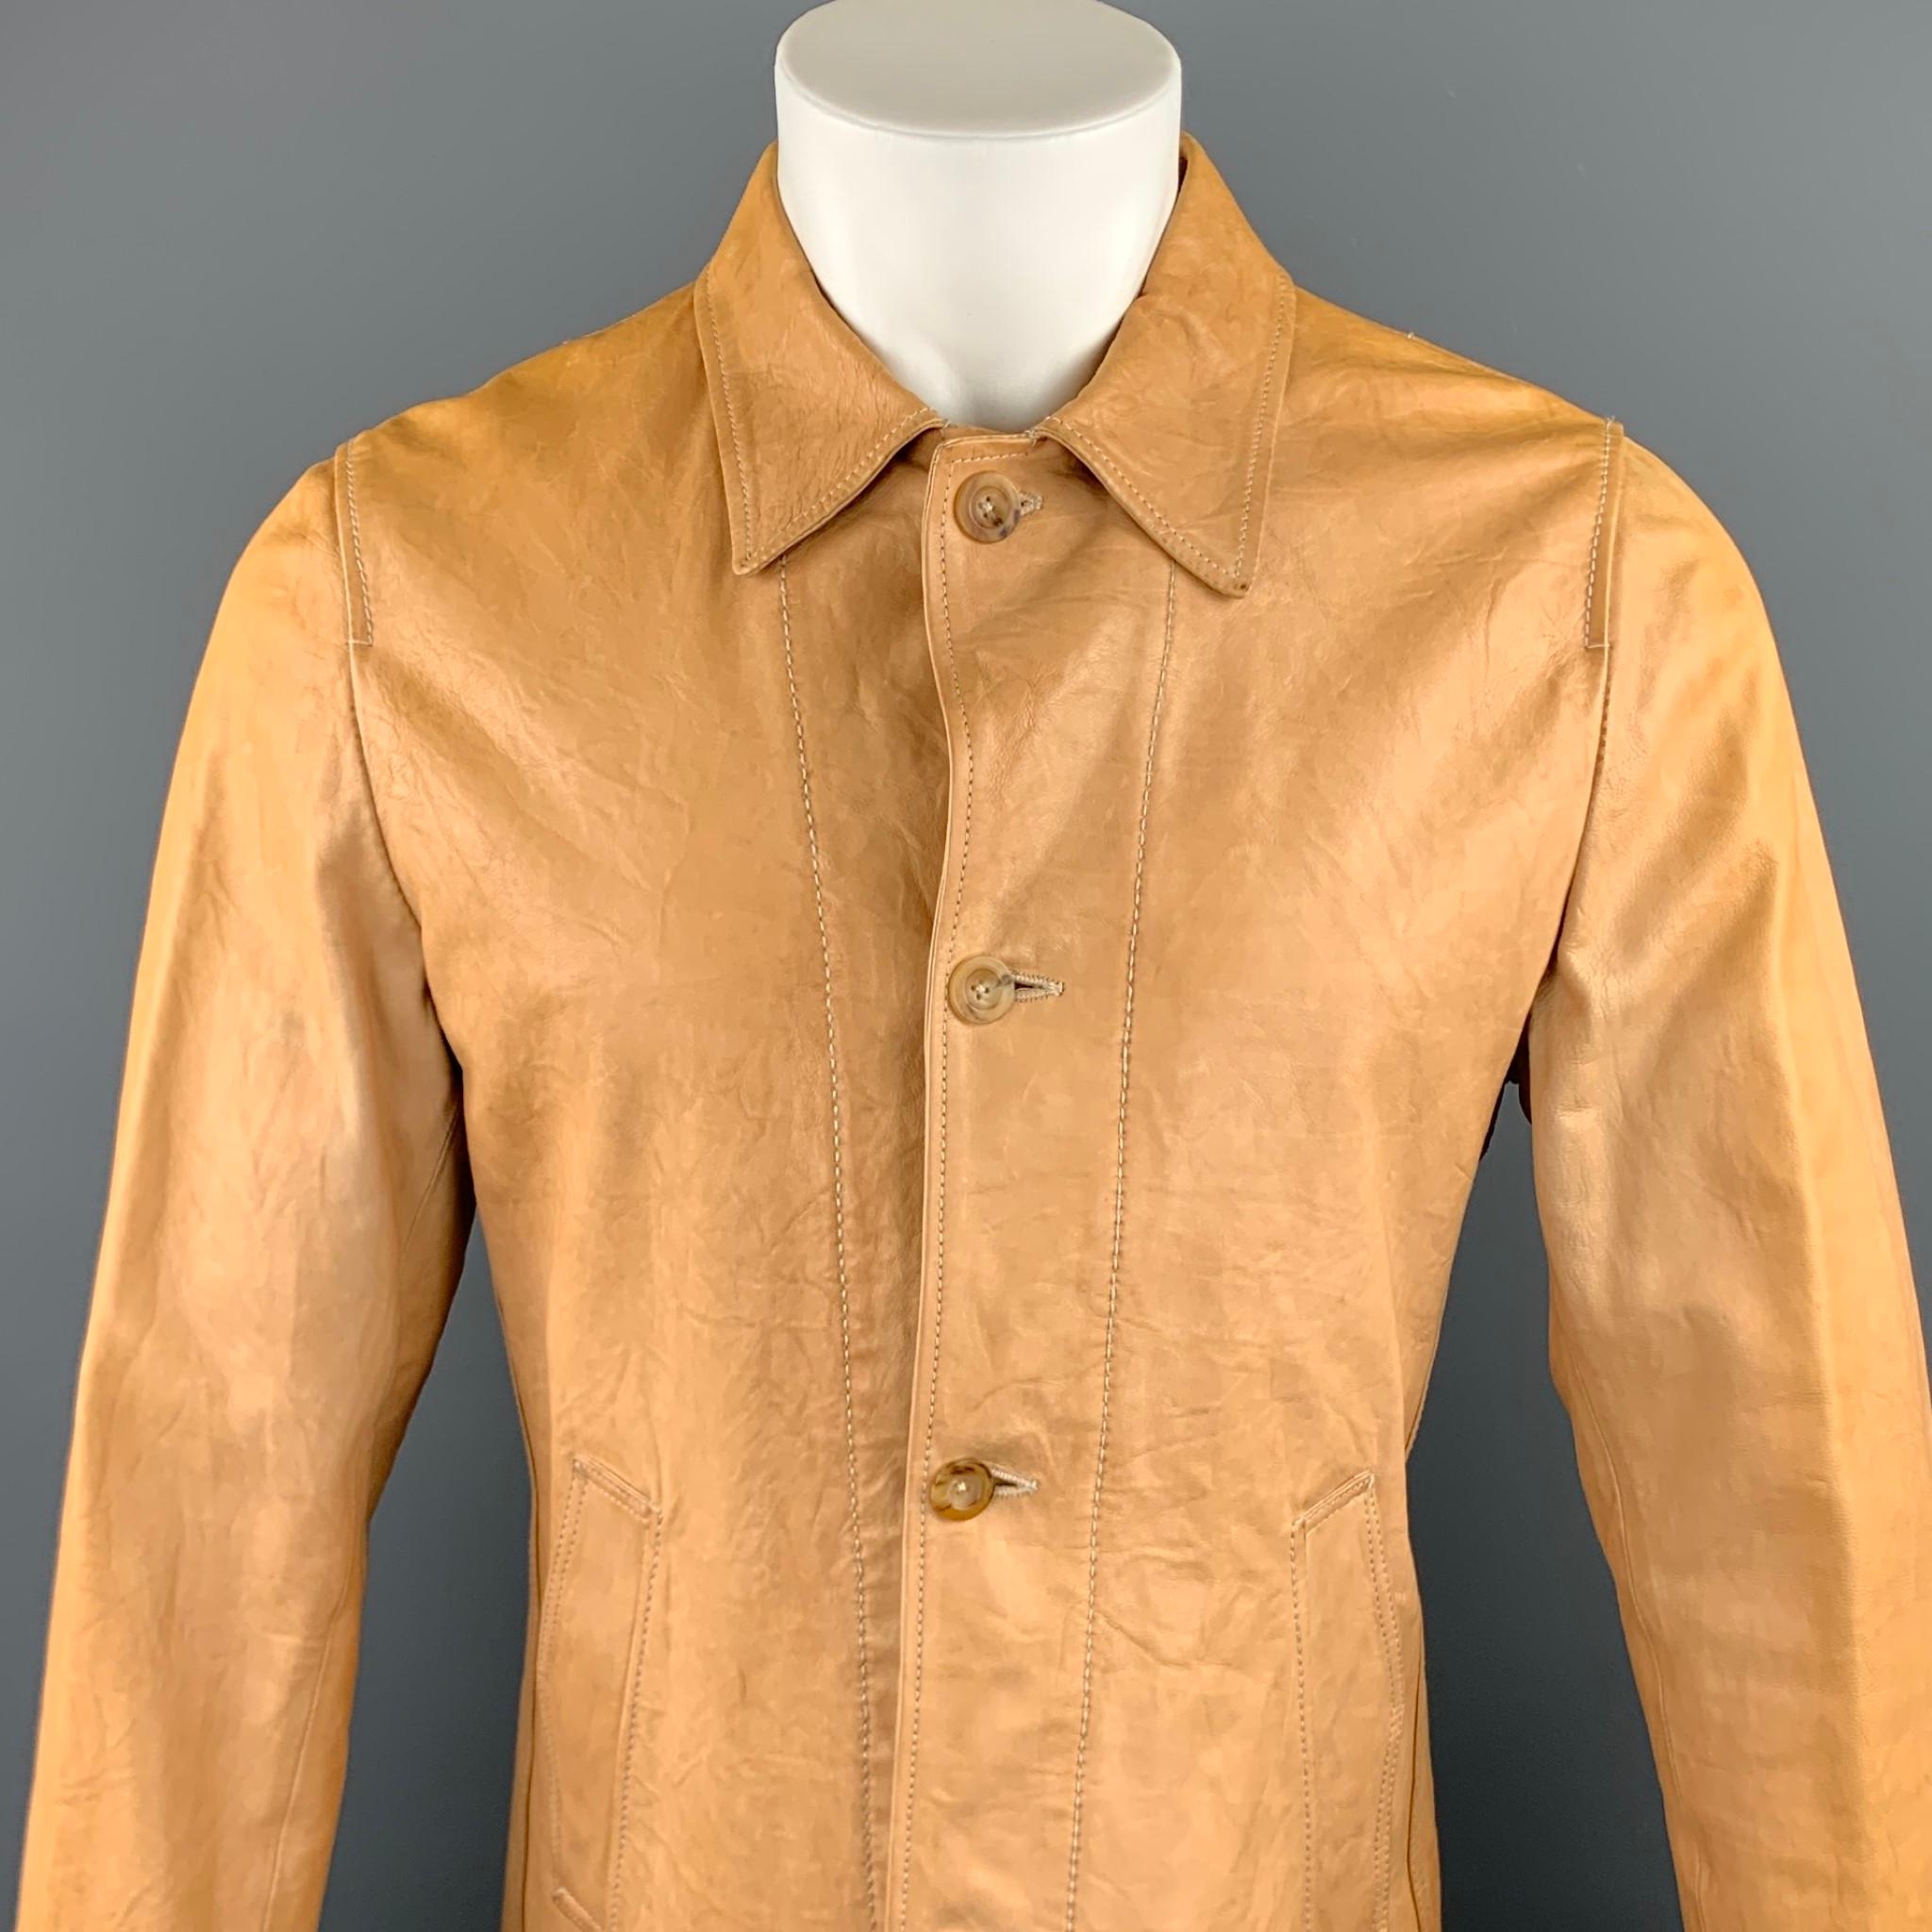 JIL SANDER jacket comes in a tan distressed leather featuring a drawstring, contrast stitching, spread collar, and a buttoned closure. Made in Italy.

Very Good Pre-Owned Condition.
Marked: IT 50

Measurements:

Shoulder: 17.5 in. 
Chest: 40 in.